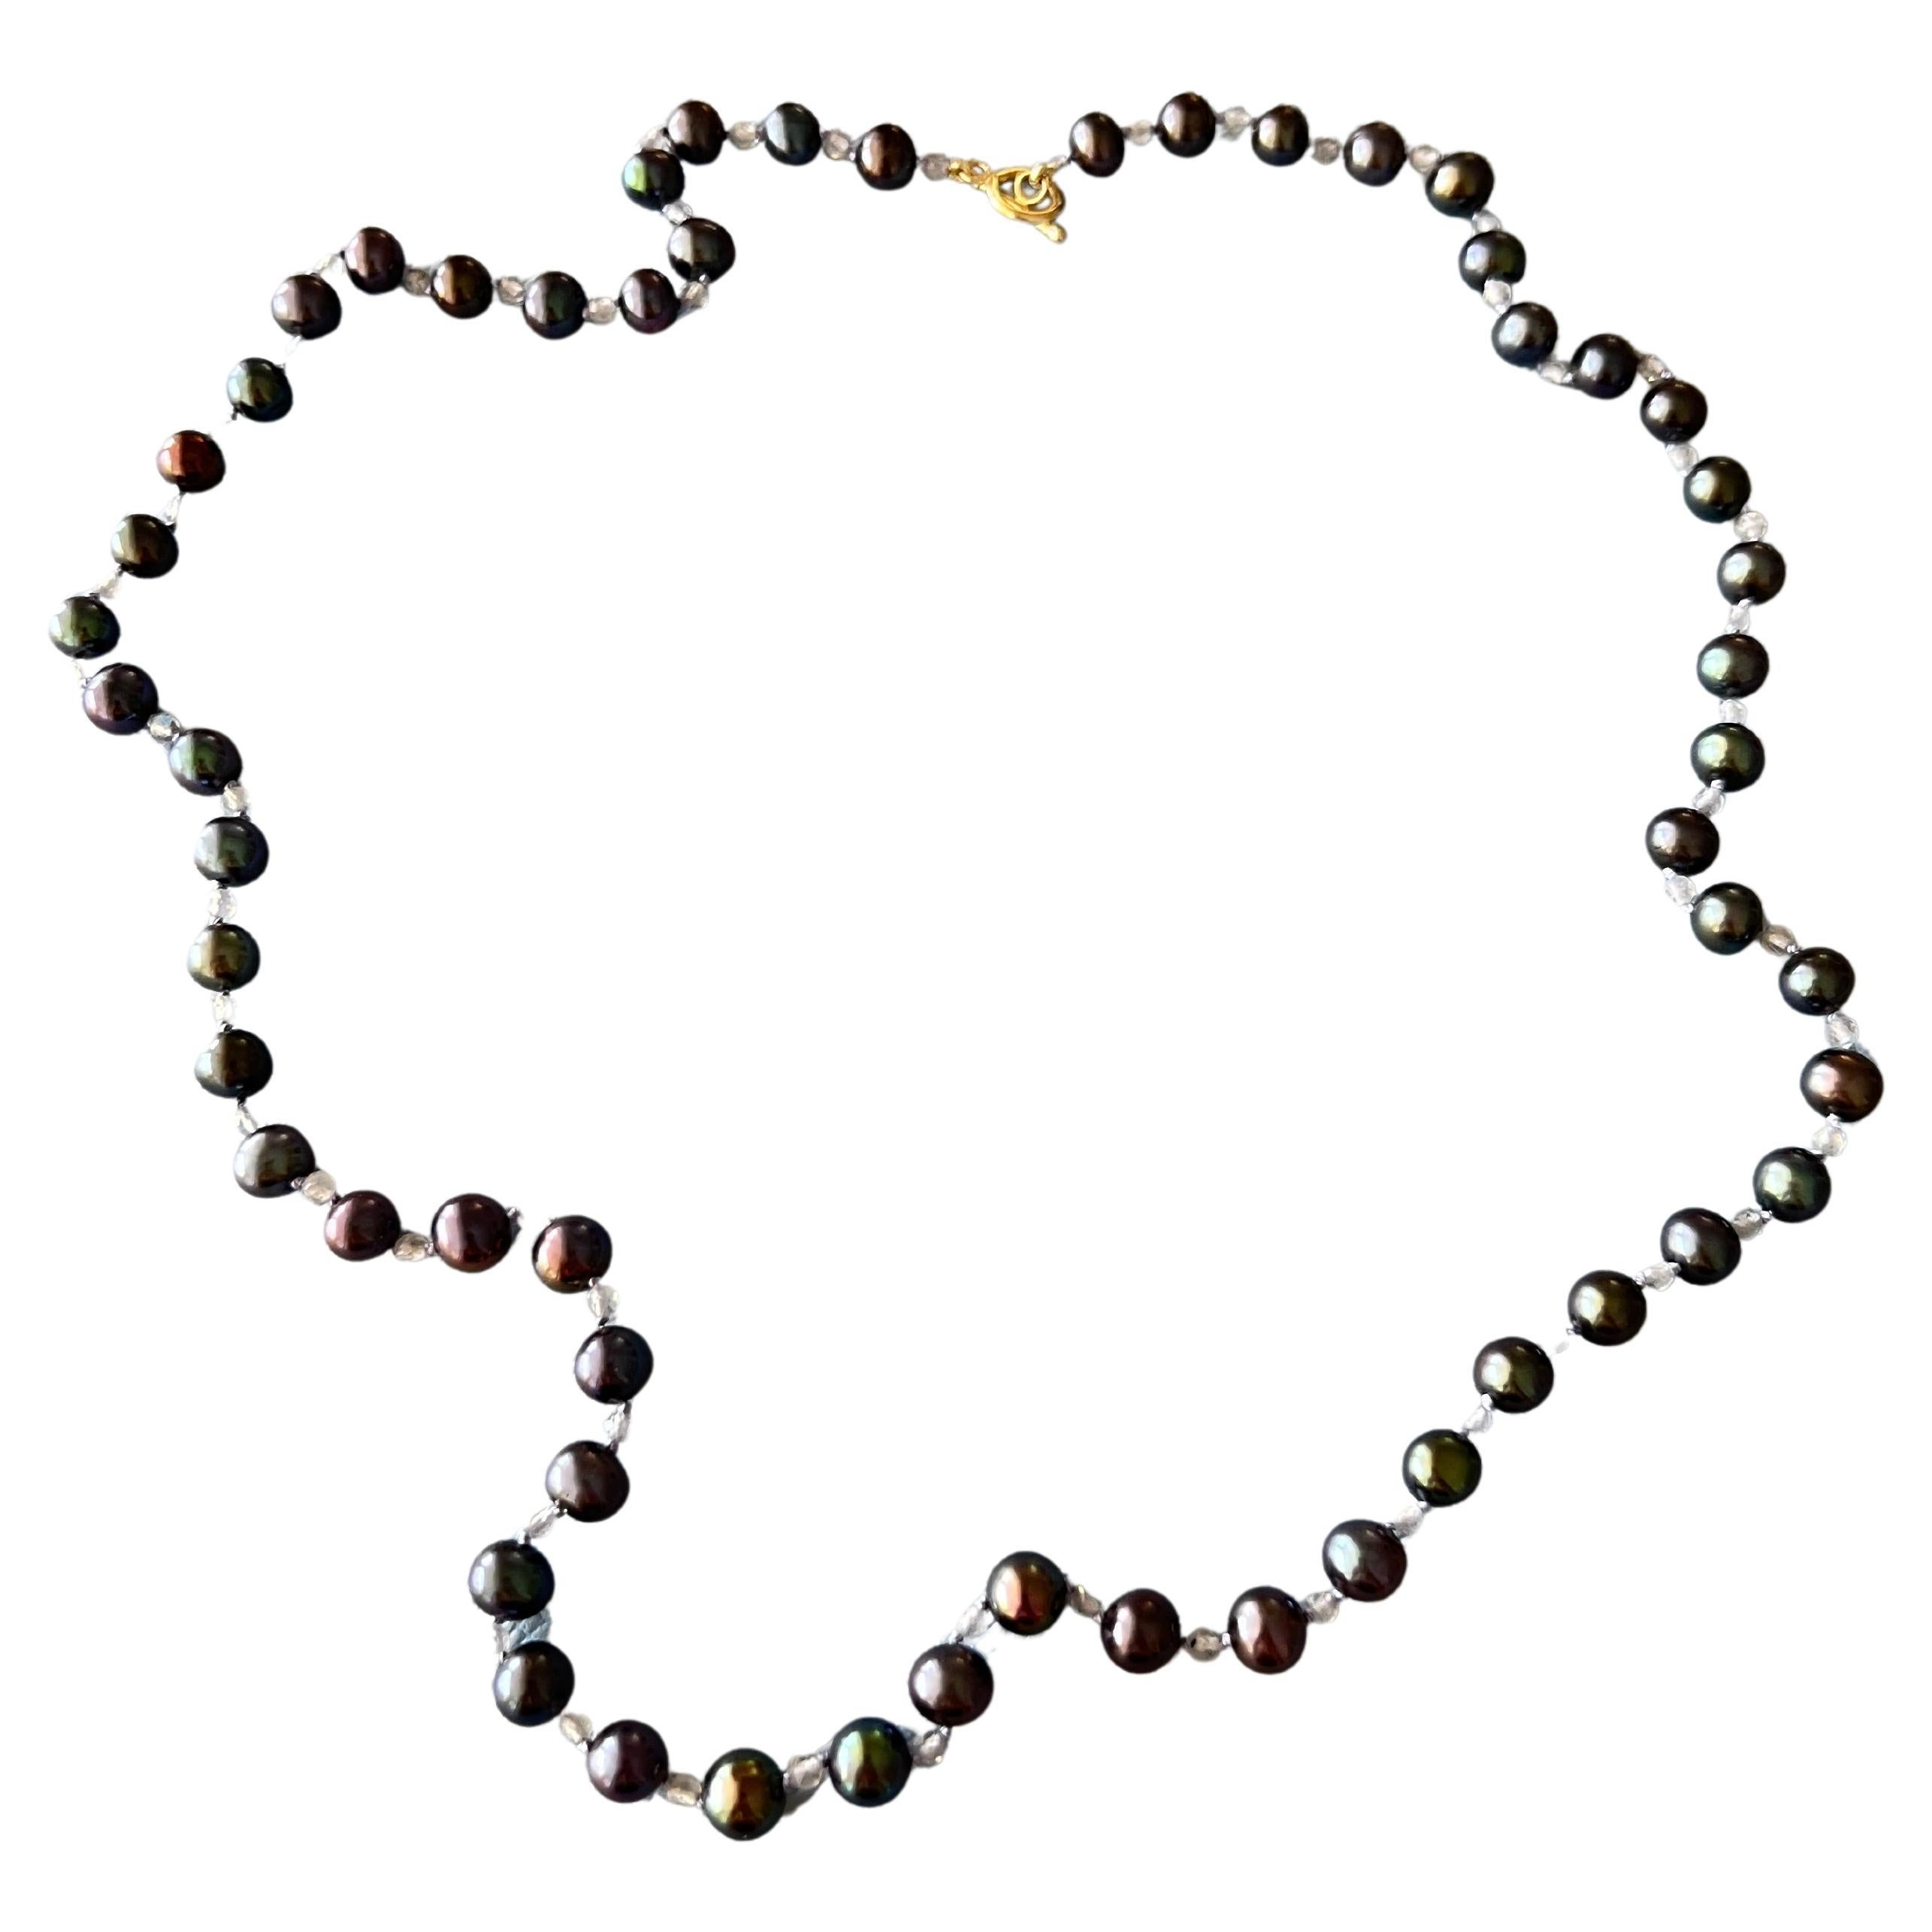  Black Pearl Labradorite Mid-Length Necklace with Gold Filled Clasp J Dauphin  For Sale